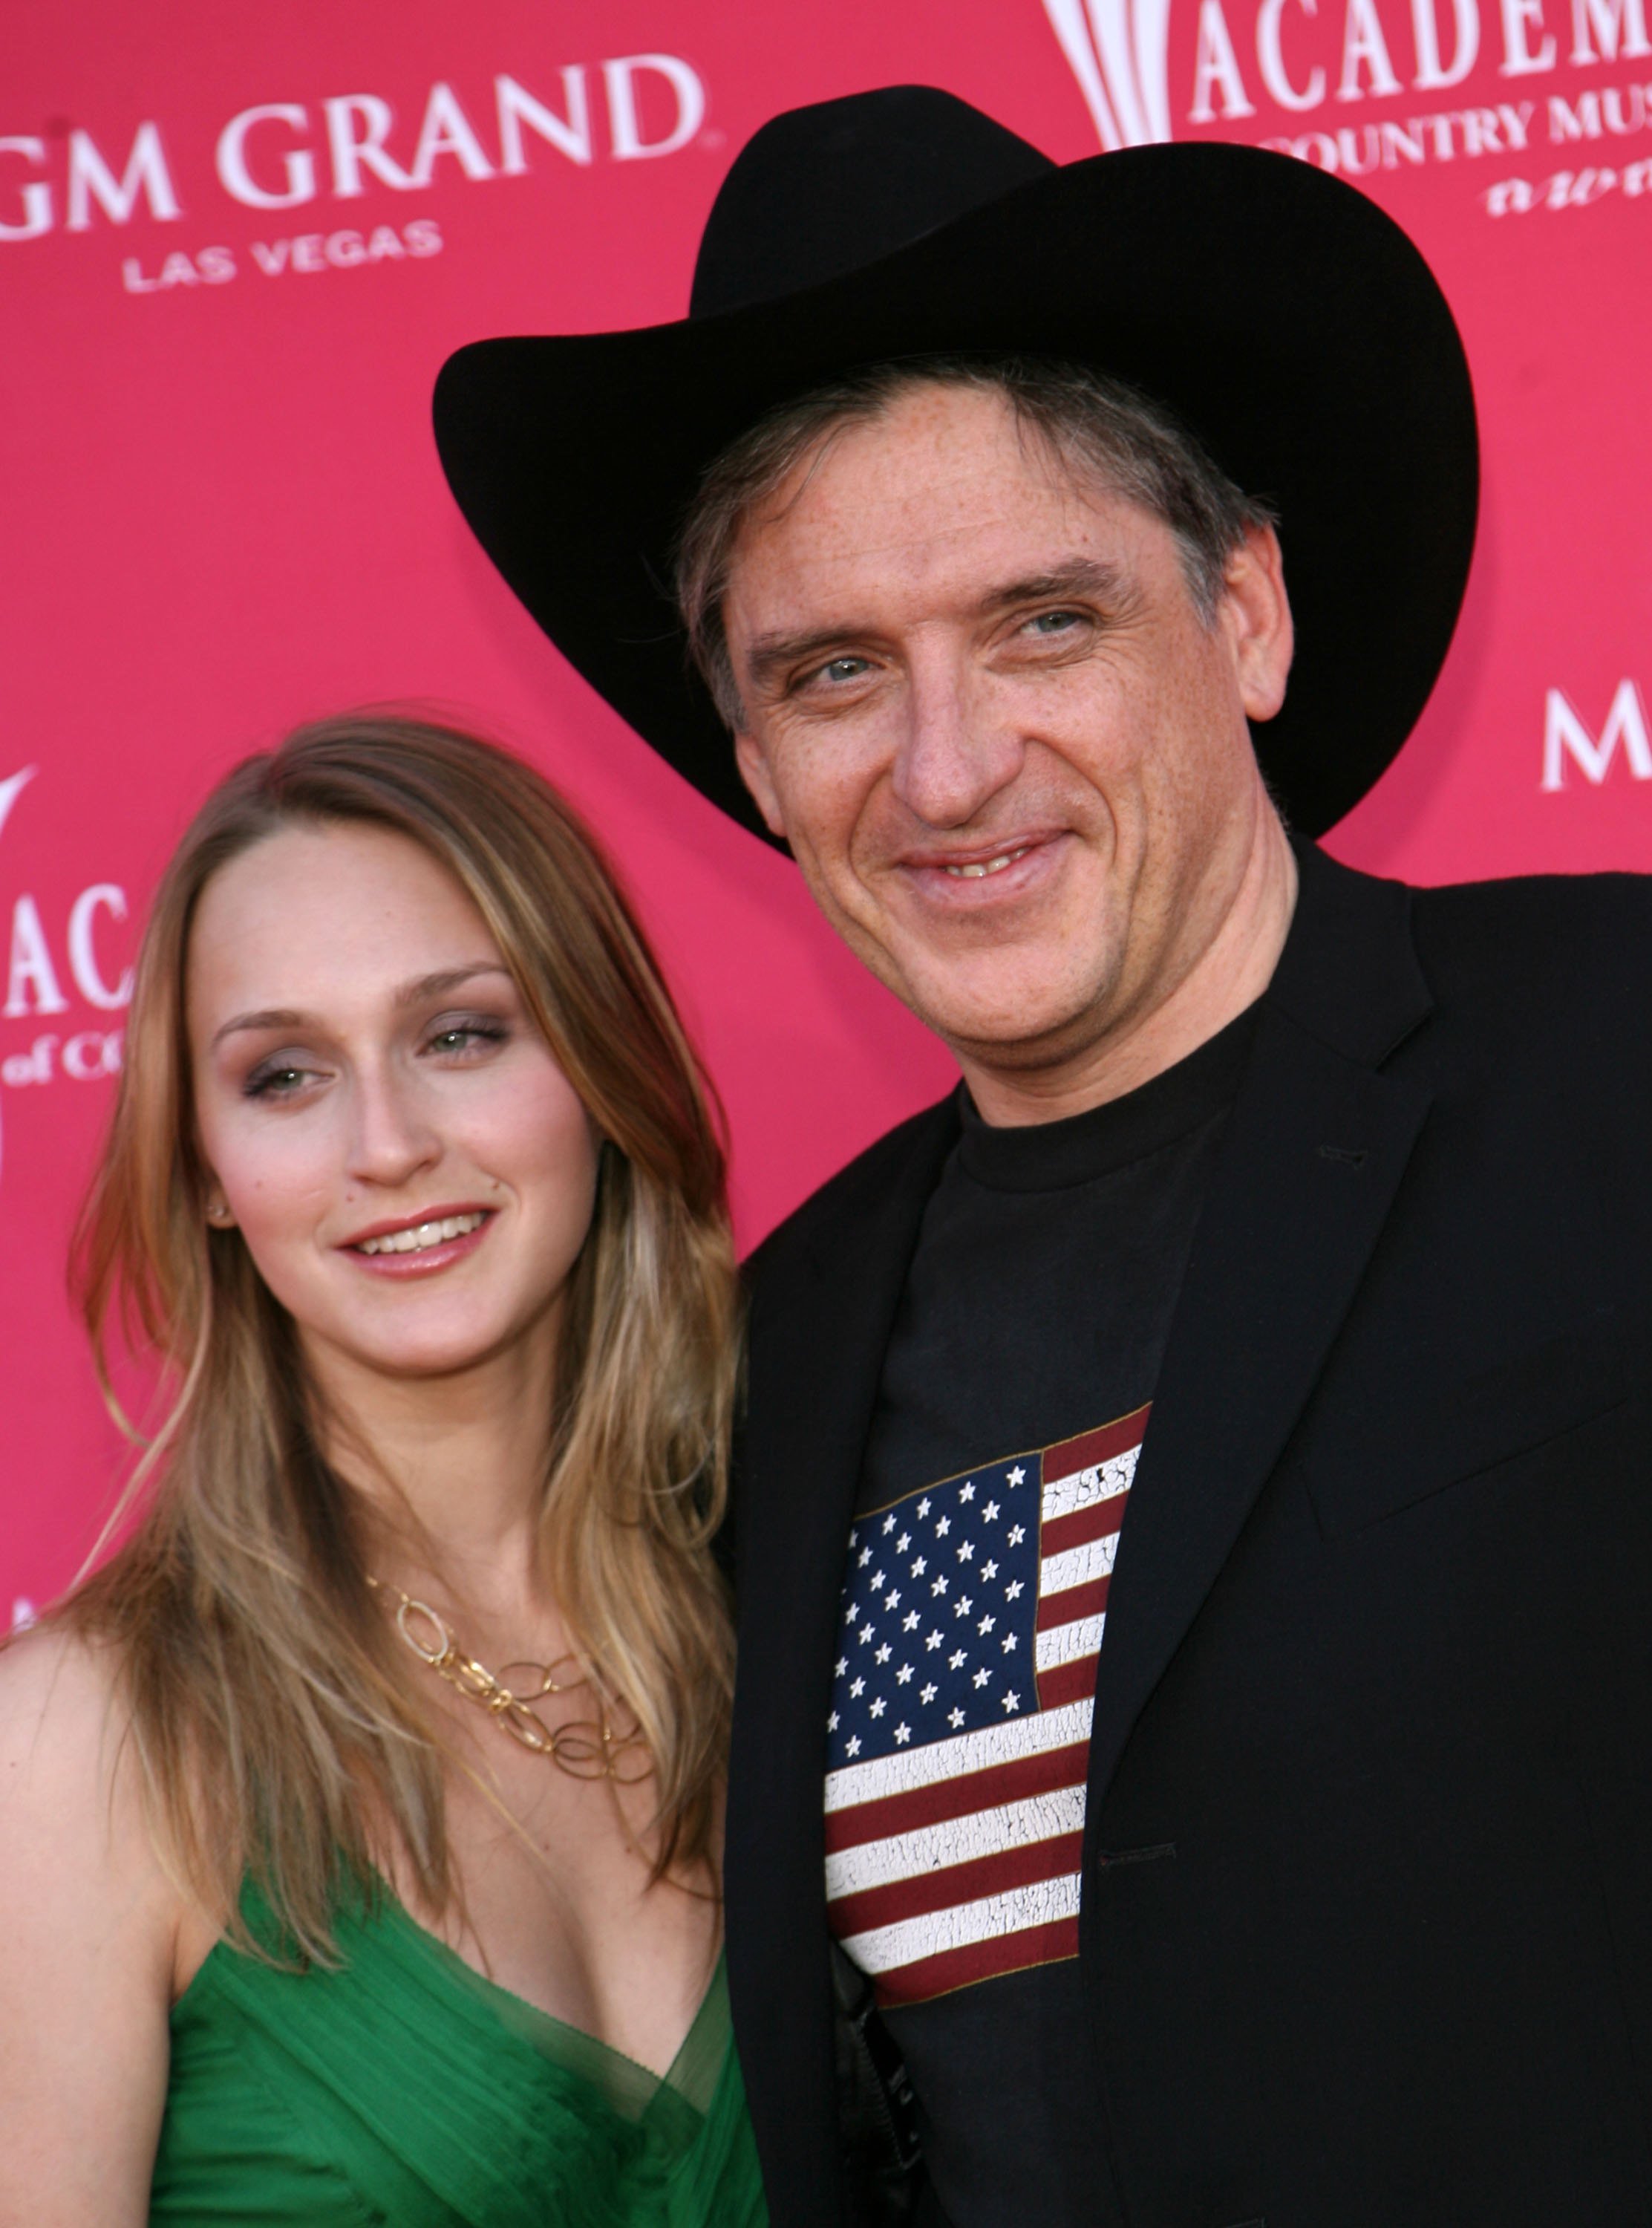 Craig Ferguson (R) and Megan Wallace-Cunningham arrives at the 41st Annual Academy Of Country Music Awards held at the MGM Grand Garden Arena on May 23, 2006, in Las Vegas, Nevada. | Source: Getty Images